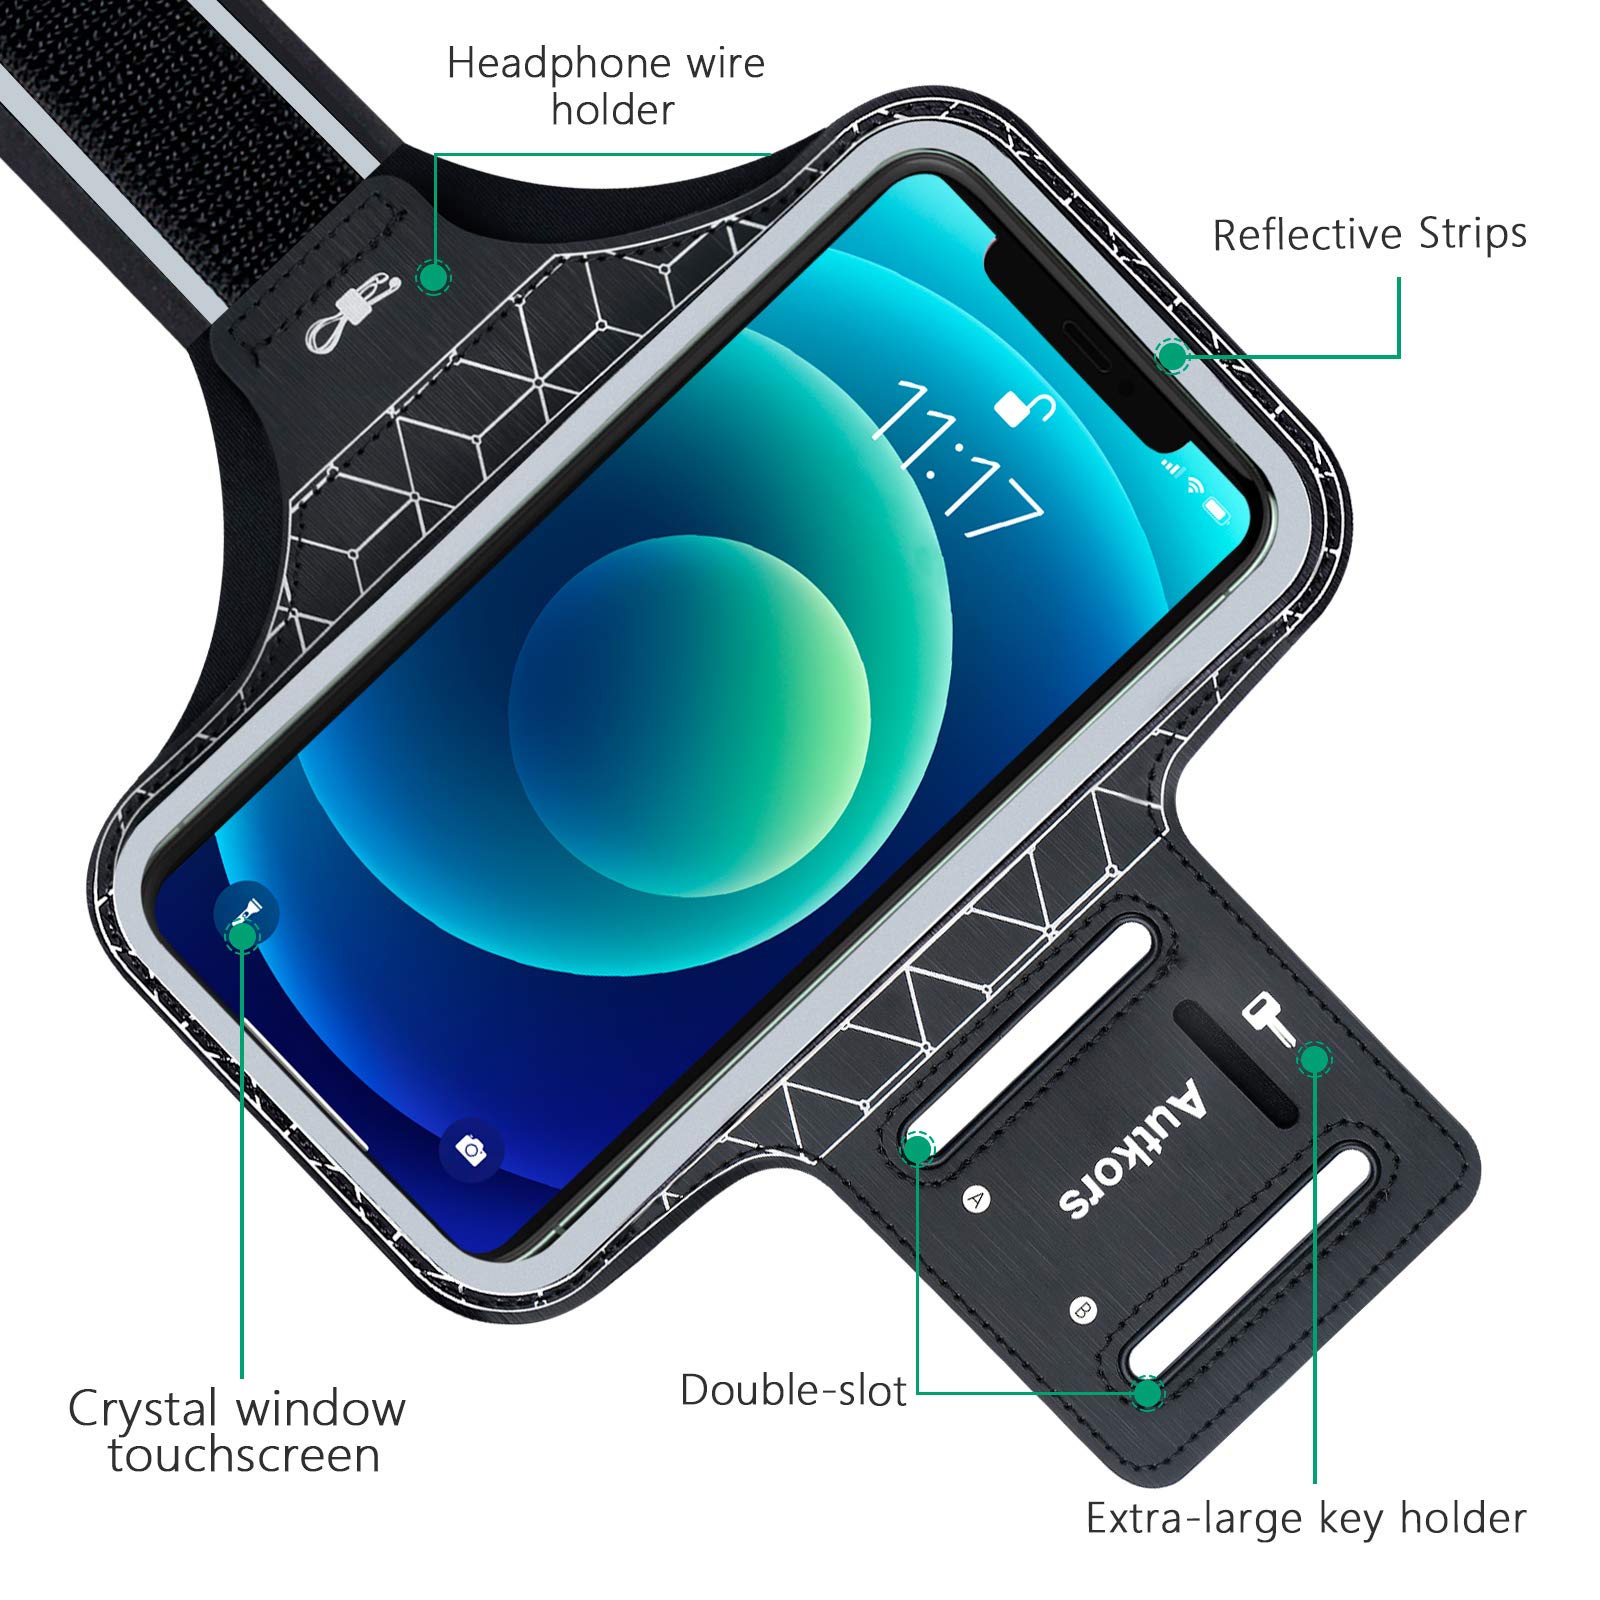 Autkors Running Armband for iPhone 13/13 Pro/12/12 Pro/SE 2020/11/11 Pro/XS/XR/X up to 6.1", Skin-Friendly Sweatproof Sports Phone Armband with Key and Headphone Slot-Perfect for Jogging, Gym